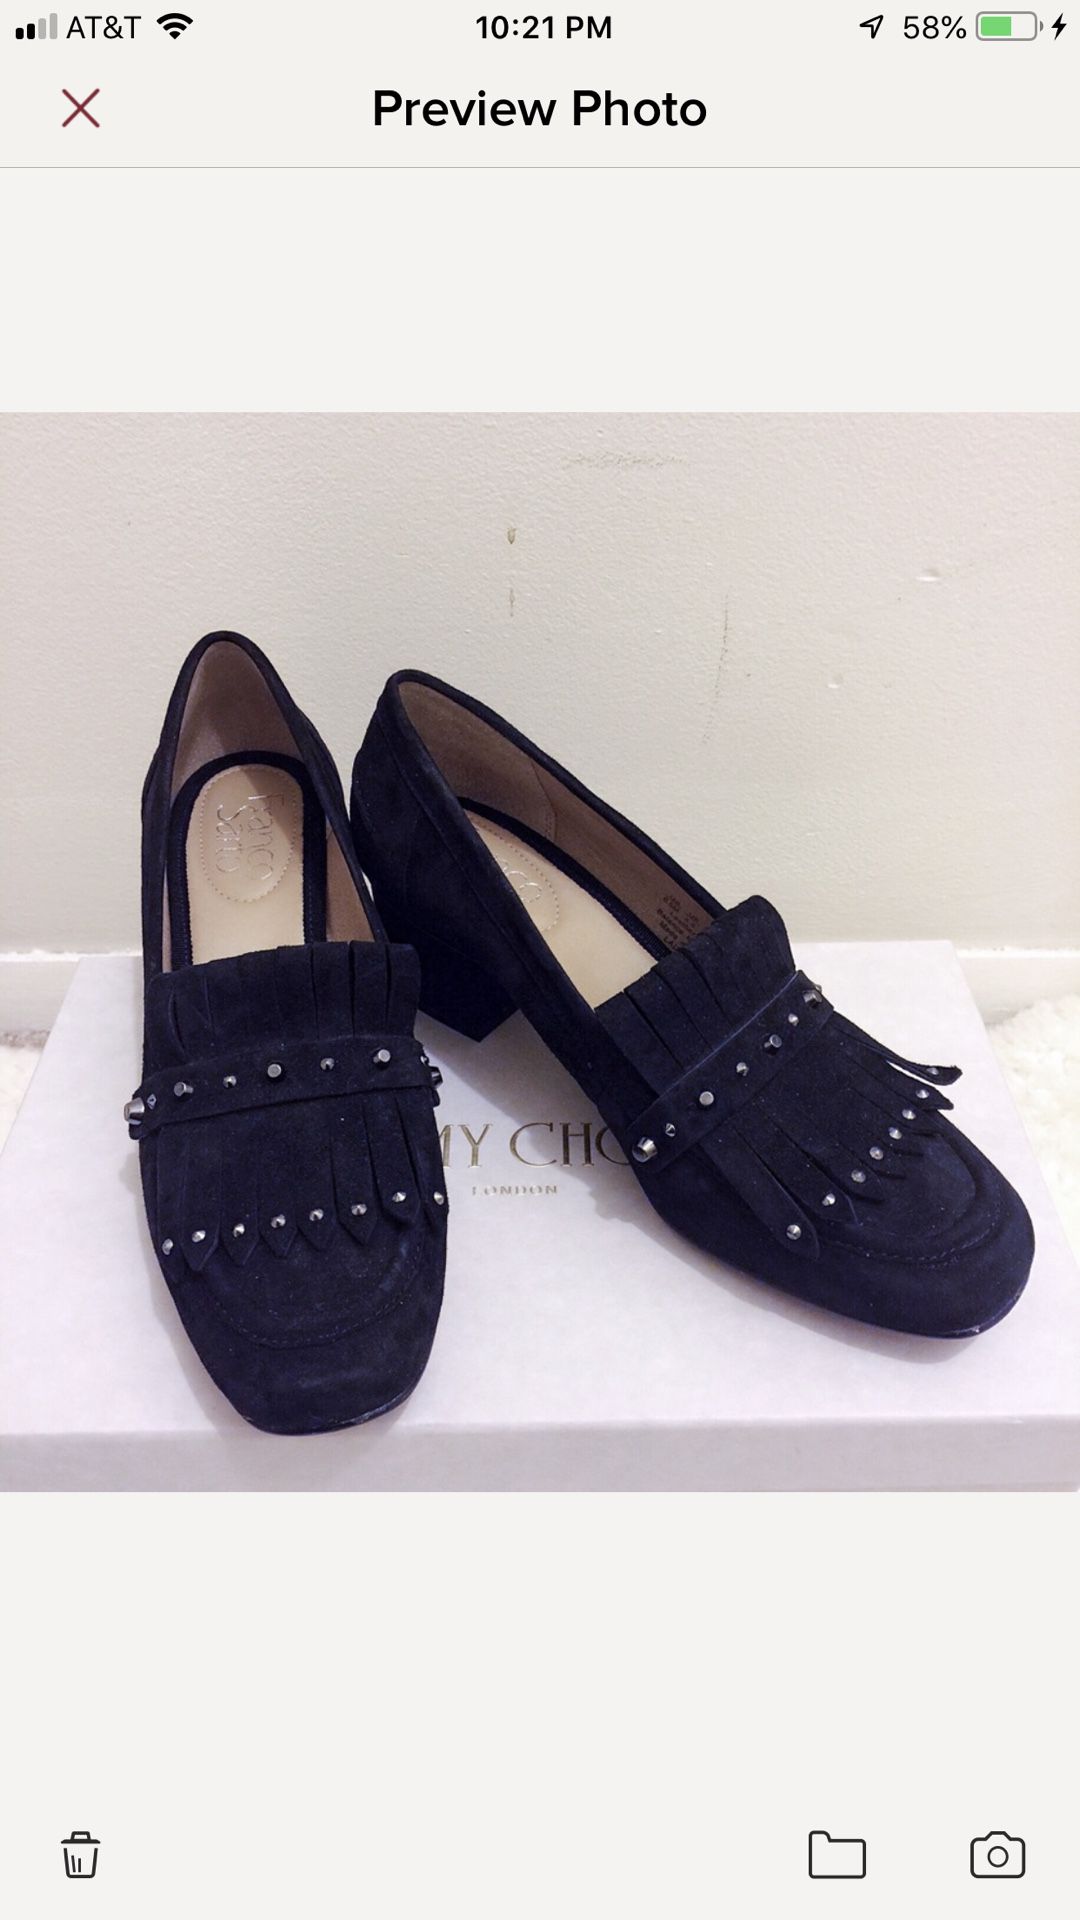 Gucci style heeled shoes size 6